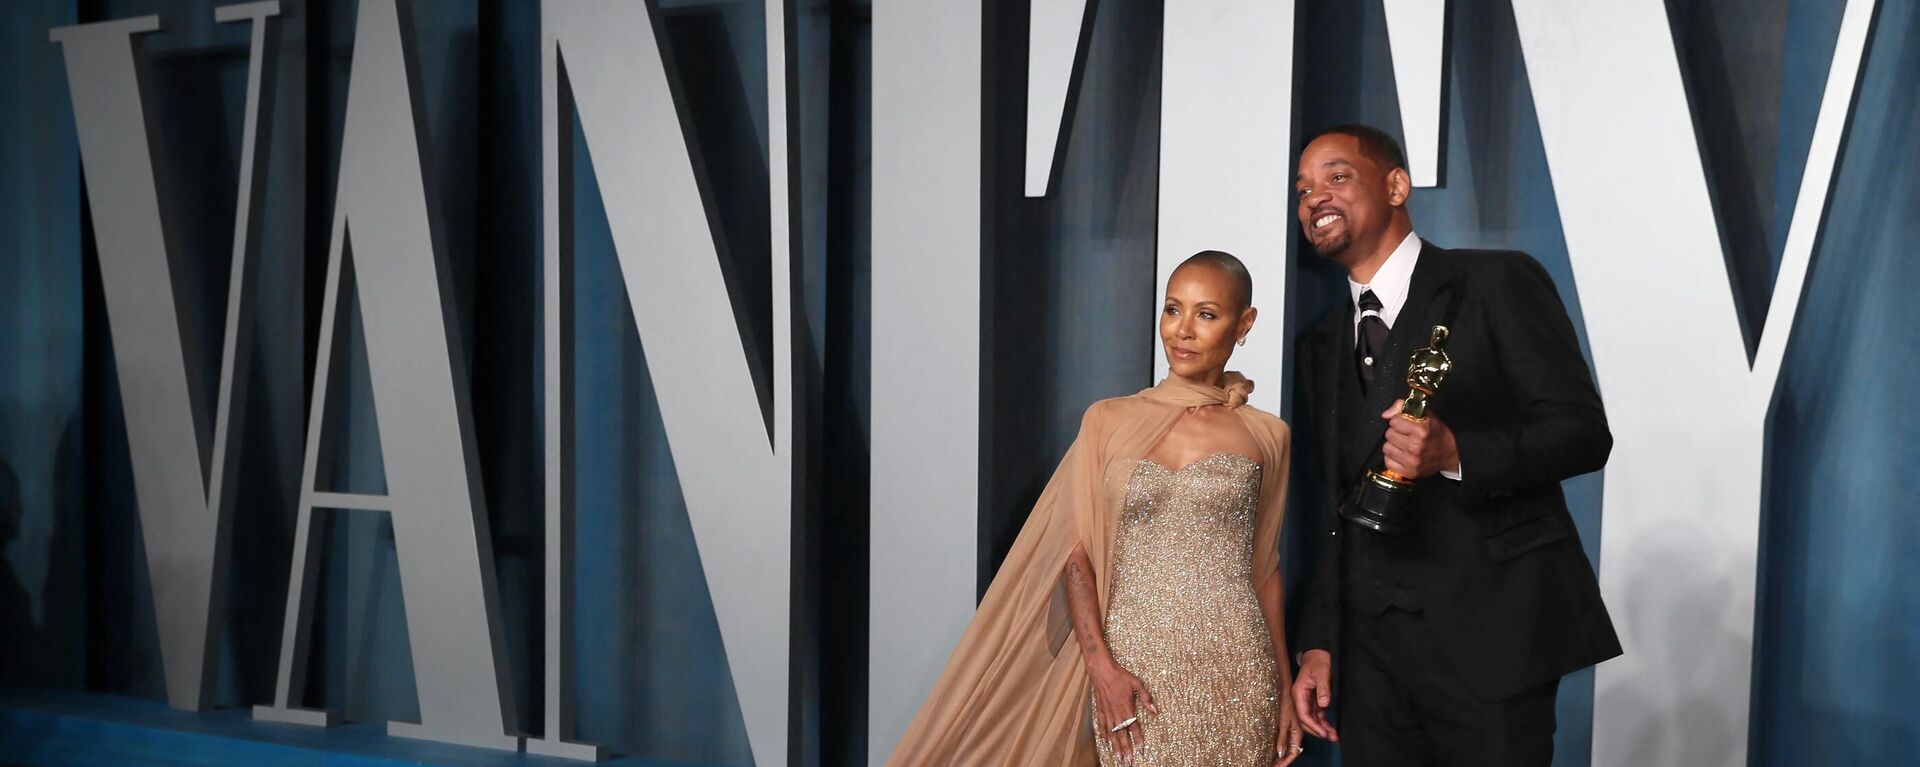 Will Smith and Jada Pinkett Smith arrive at the Vanity Fair Oscar party during the 94th Academy Awards in Beverly Hills, California, U.S., March 27, 2022 - Sputnik International, 1920, 02.04.2022